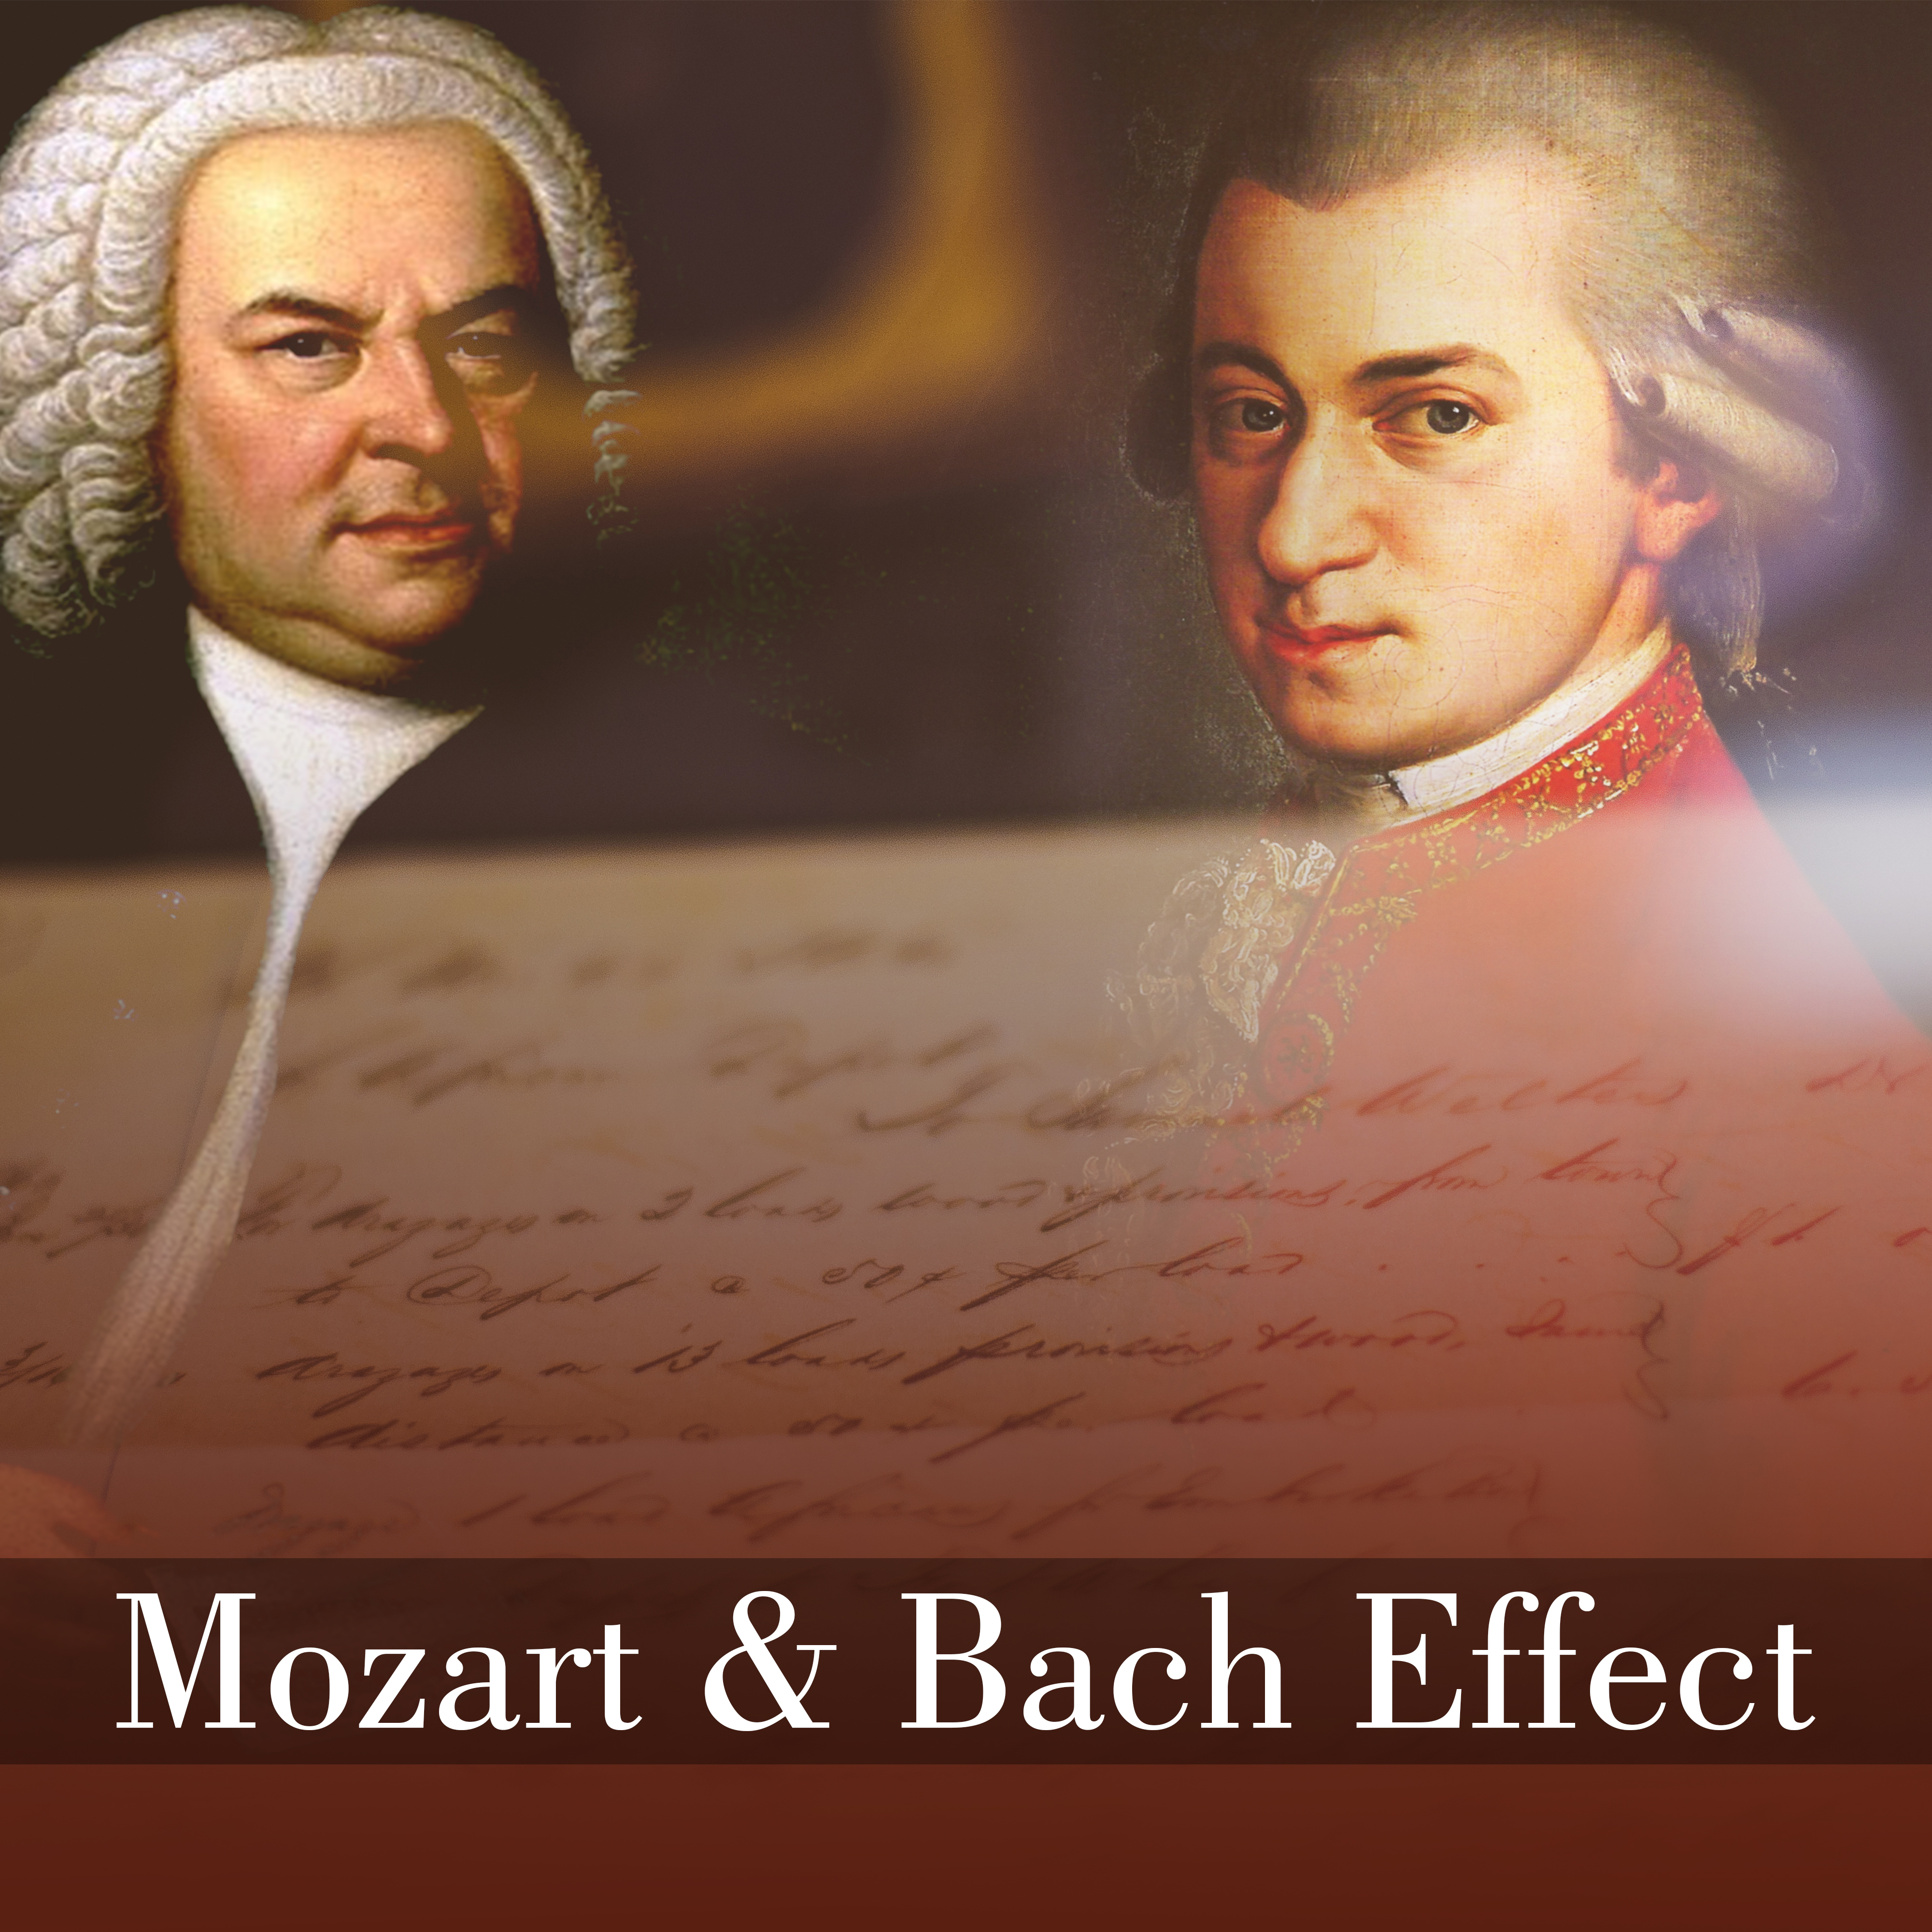 Mozart  Bach Effect  Classical Music for Studying, Learning, Reading, Improve Memory, Relaxation